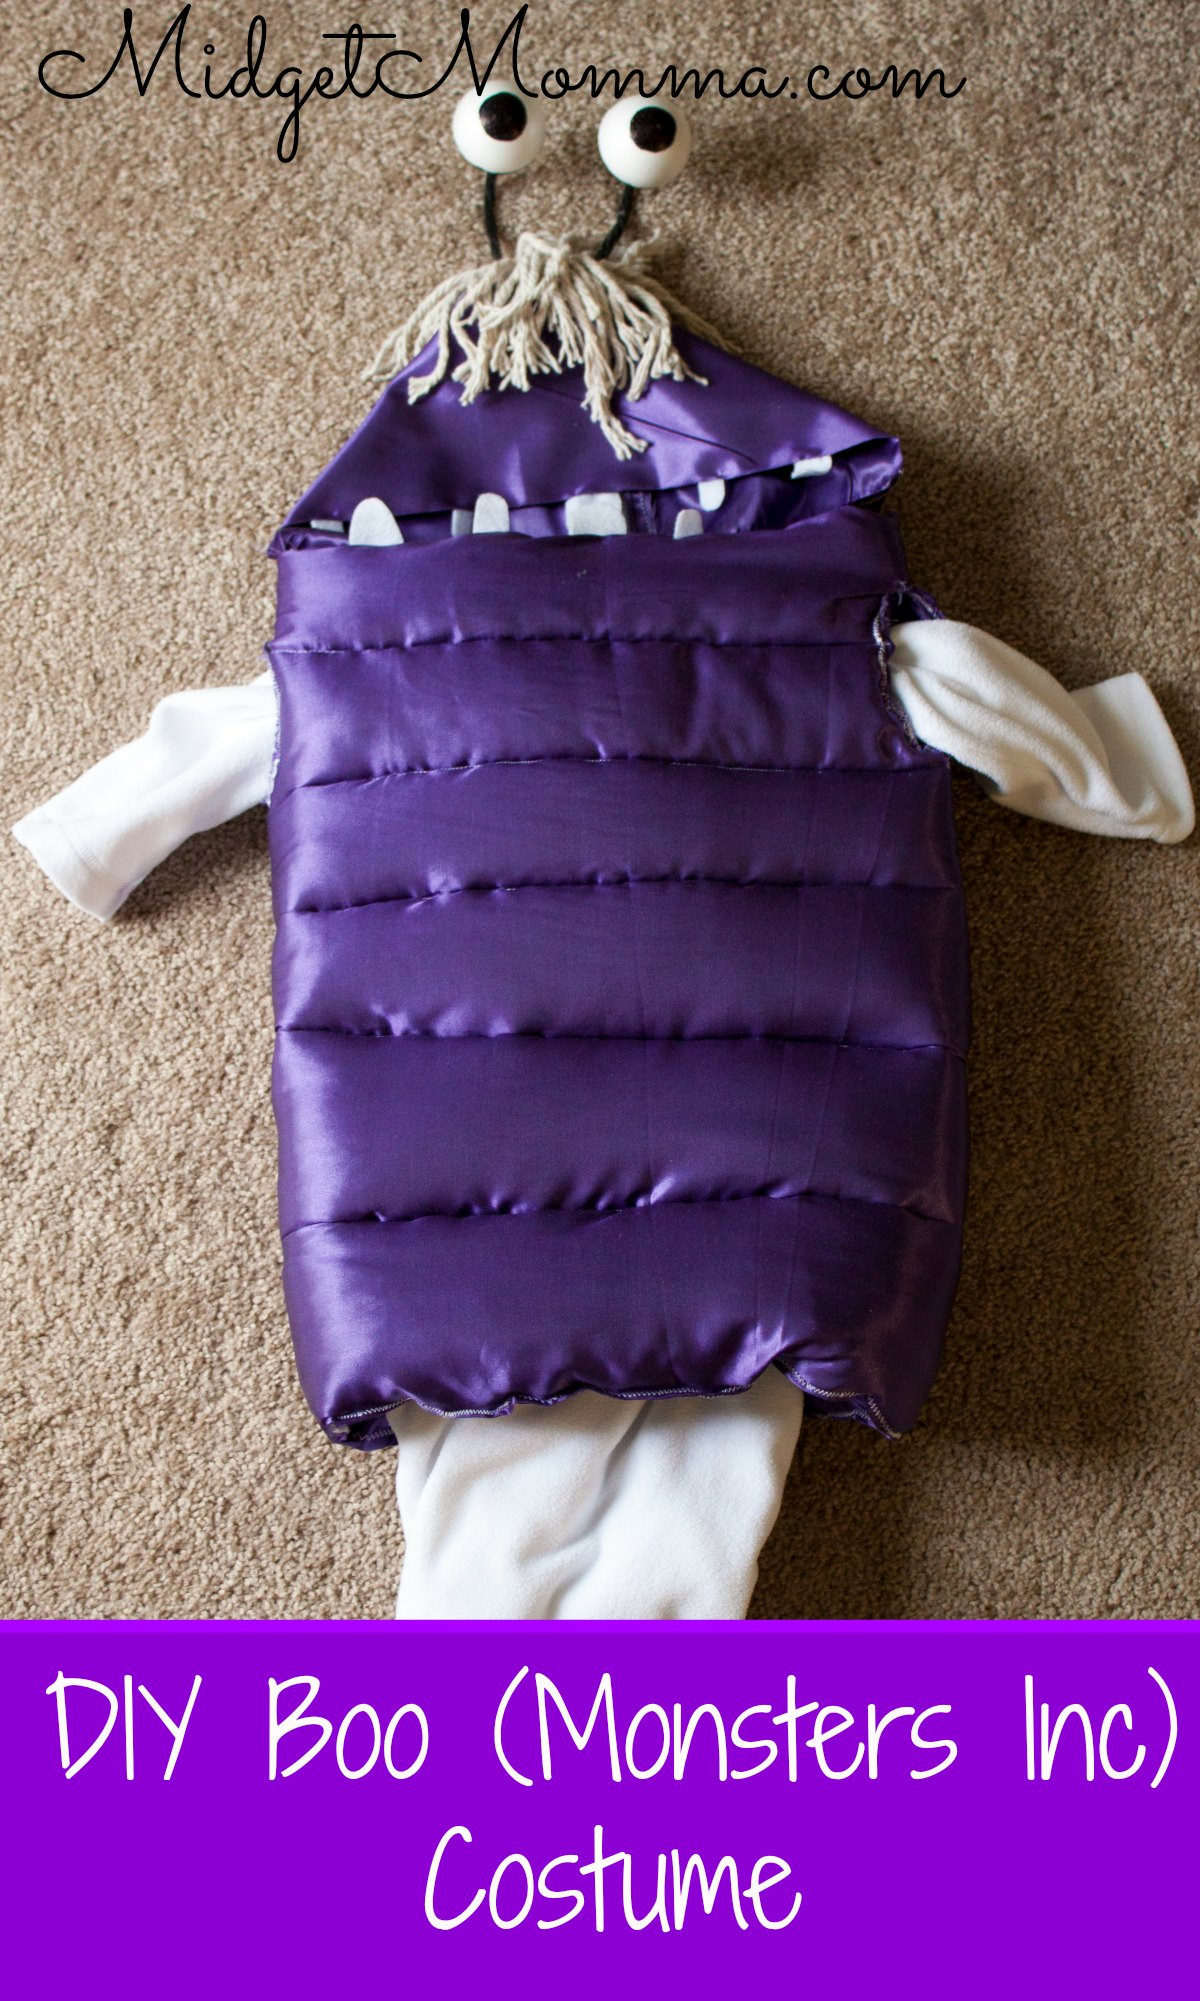 Monsters Inc Costumes DIY
 DIY Boo From Monster Inc Costume